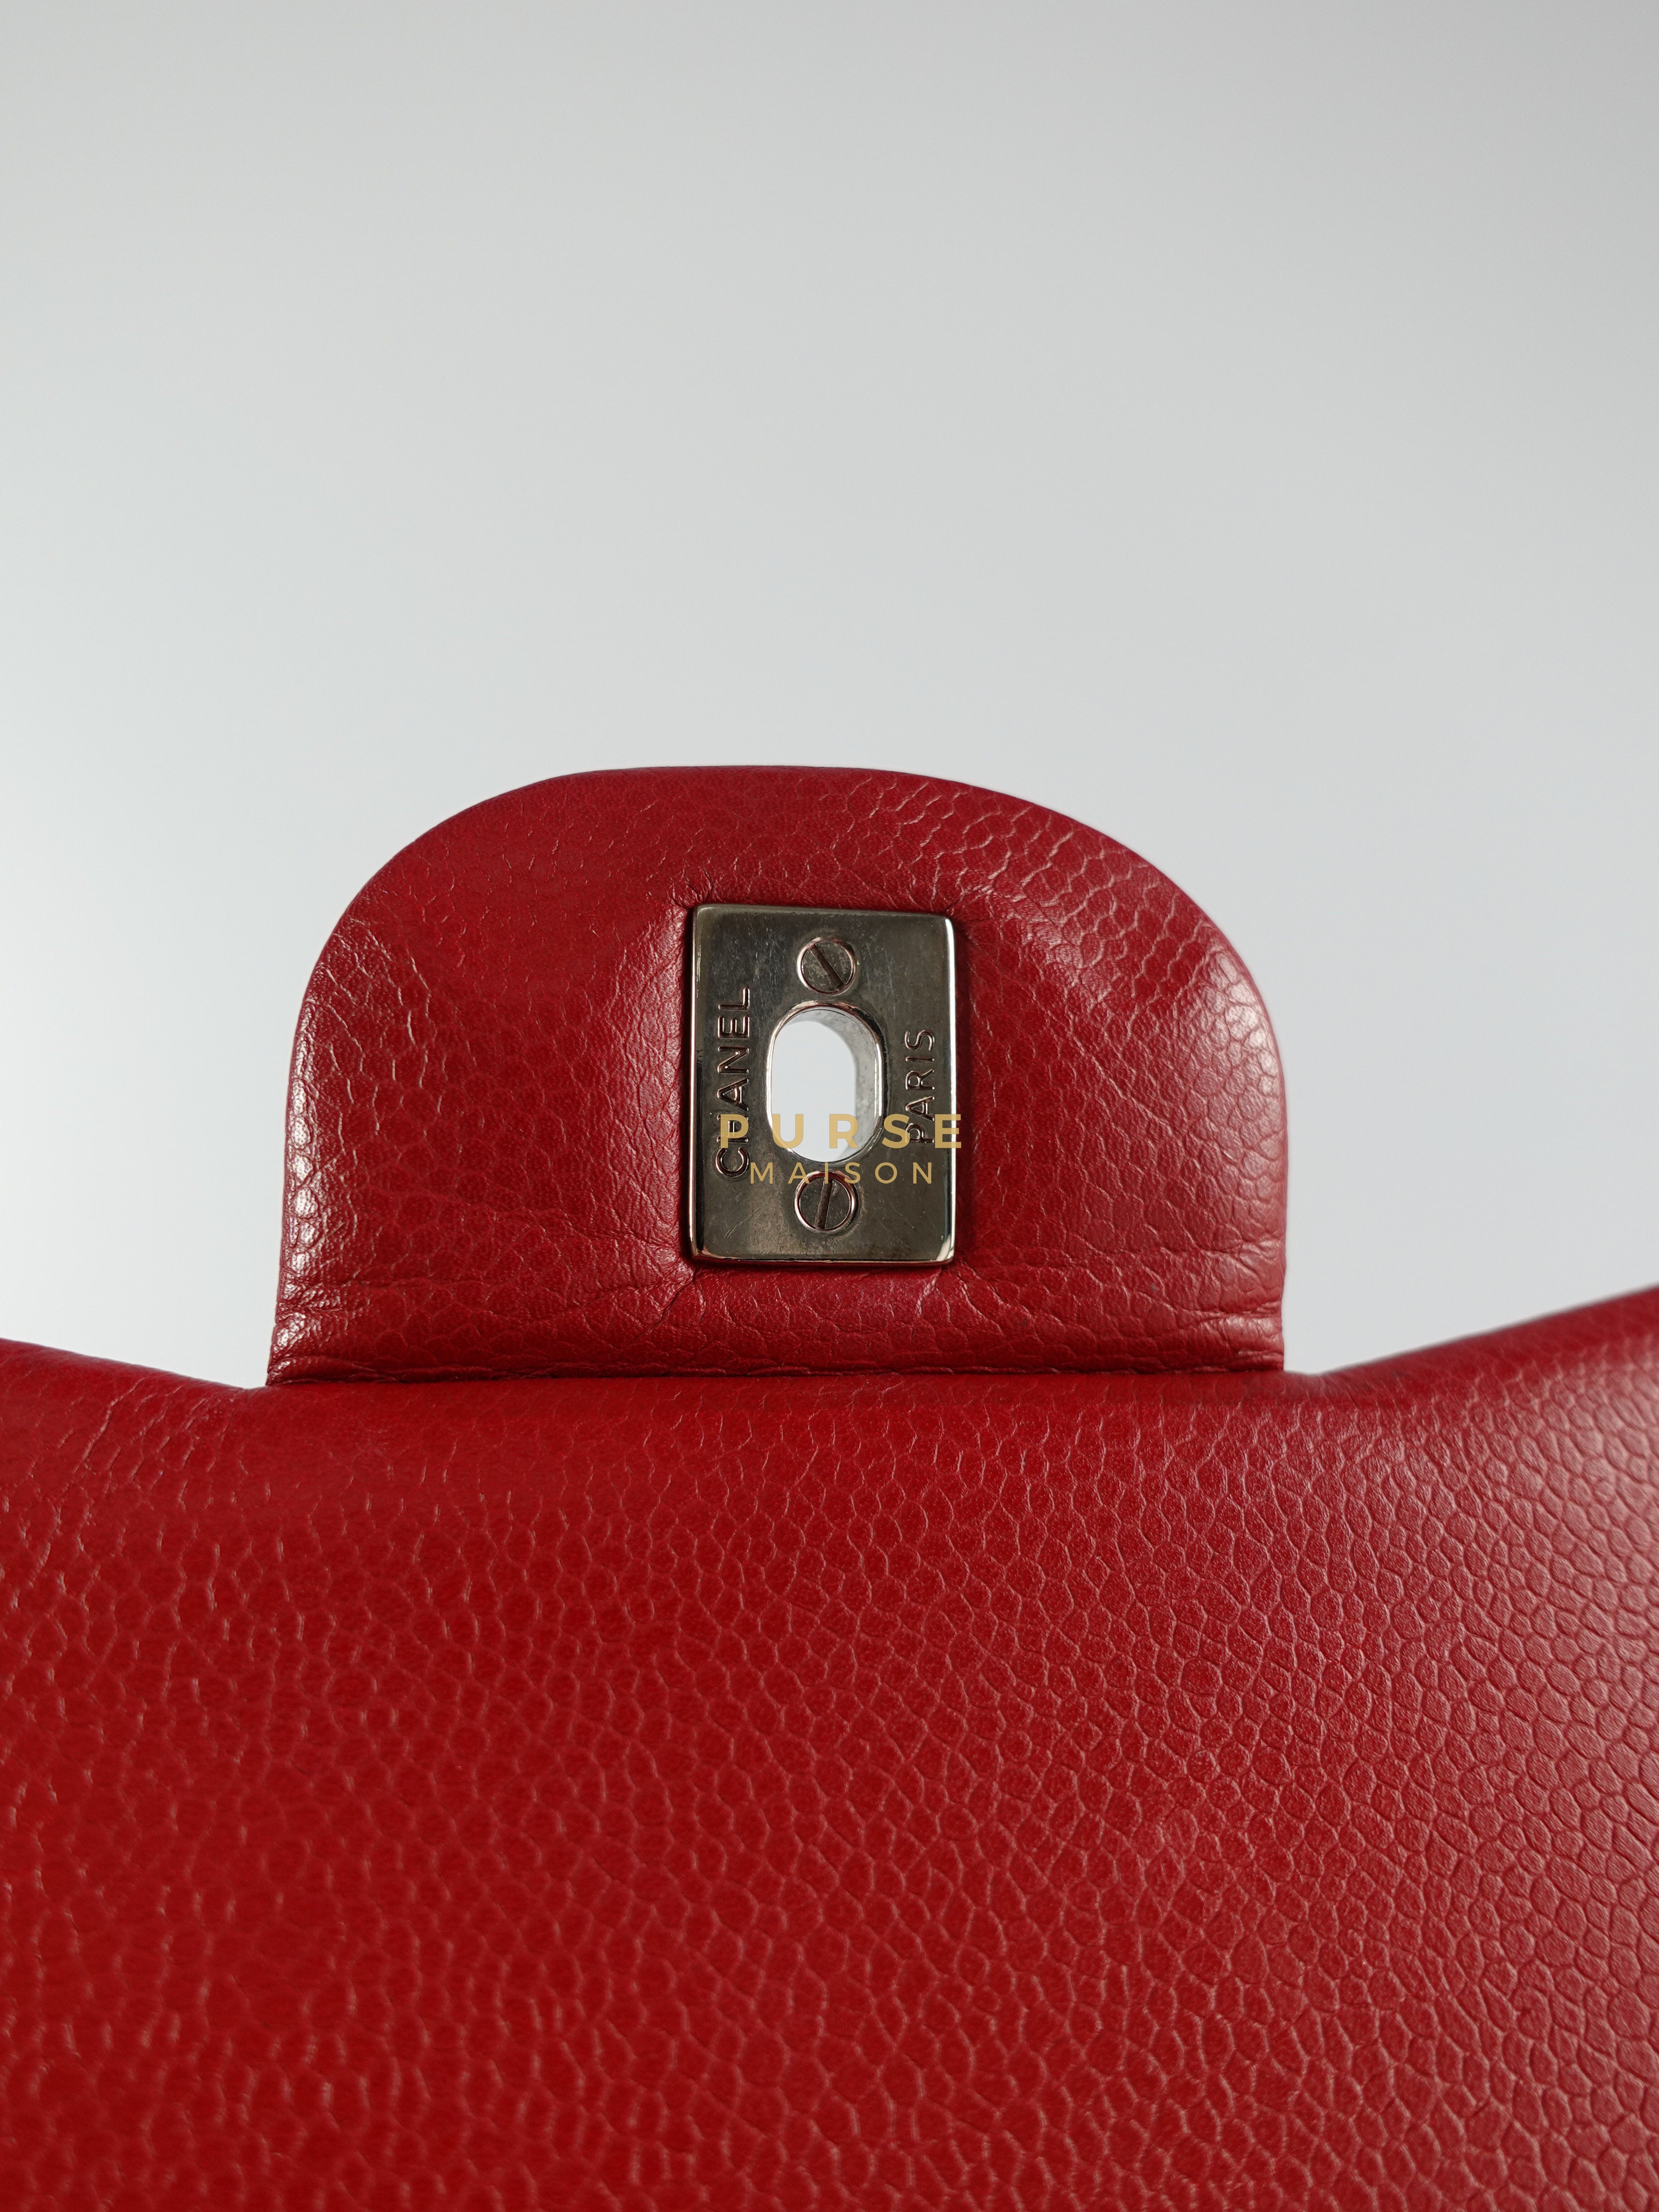 Classic Jumbo Red Caviar in Calfskin Leather & Silver Hardware Series 14 | Purse Maison Luxury Bags Shop